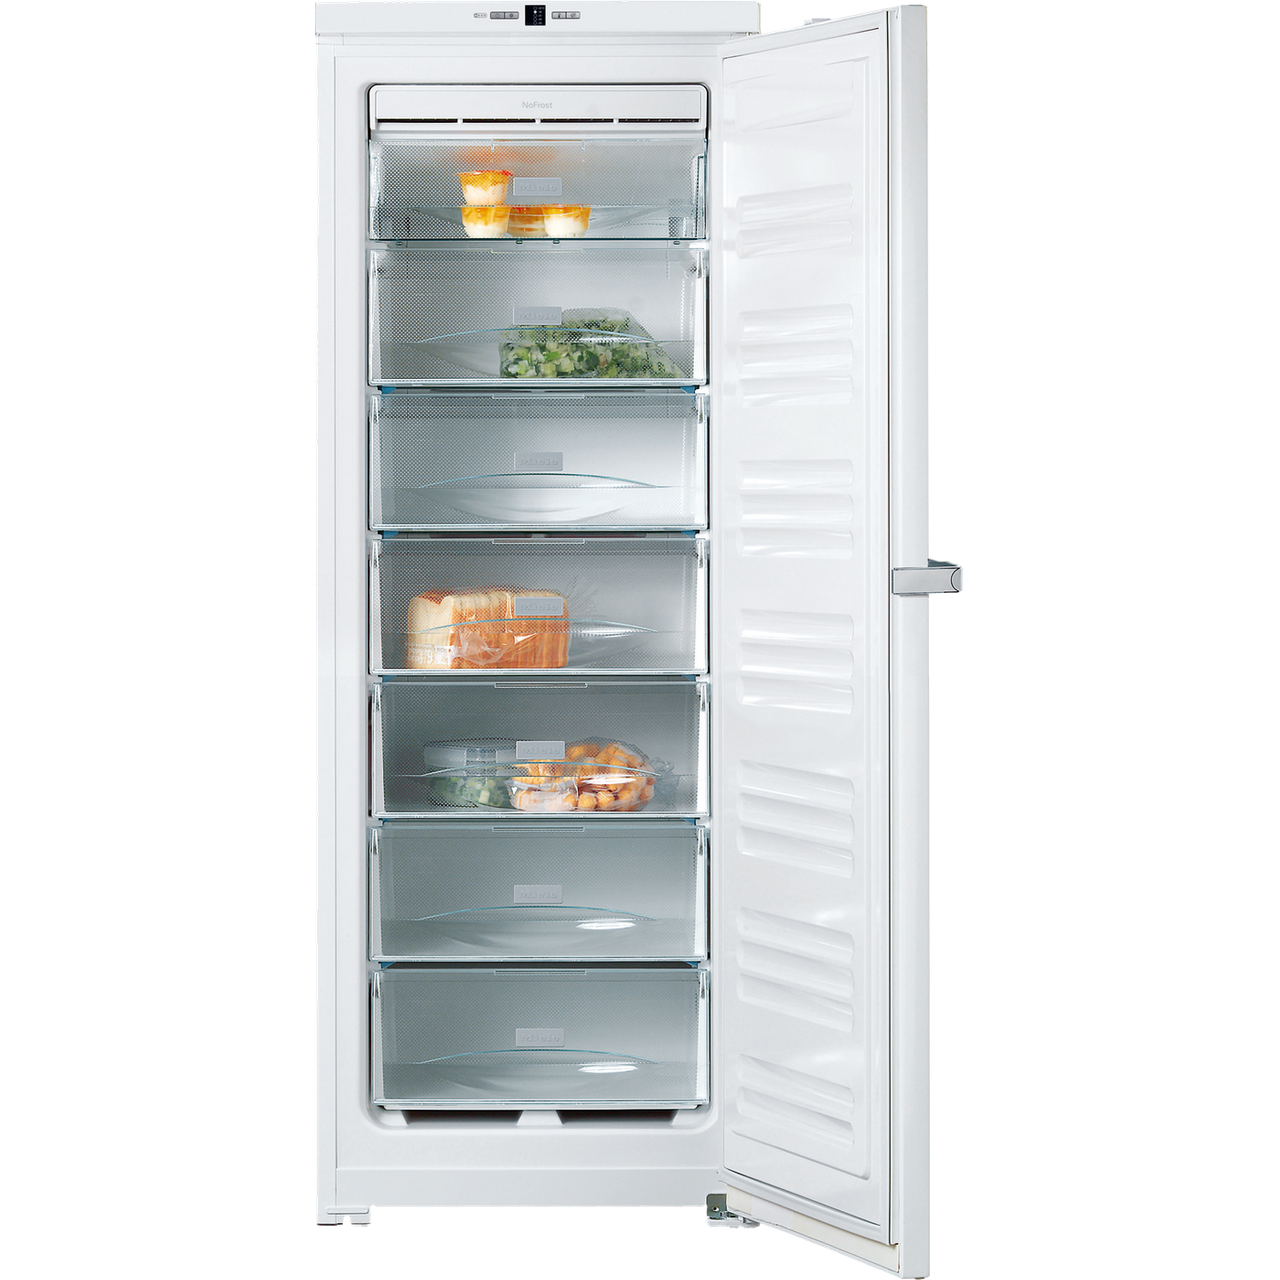 Miele FN26062ws Frost Free Upright Freezer Review